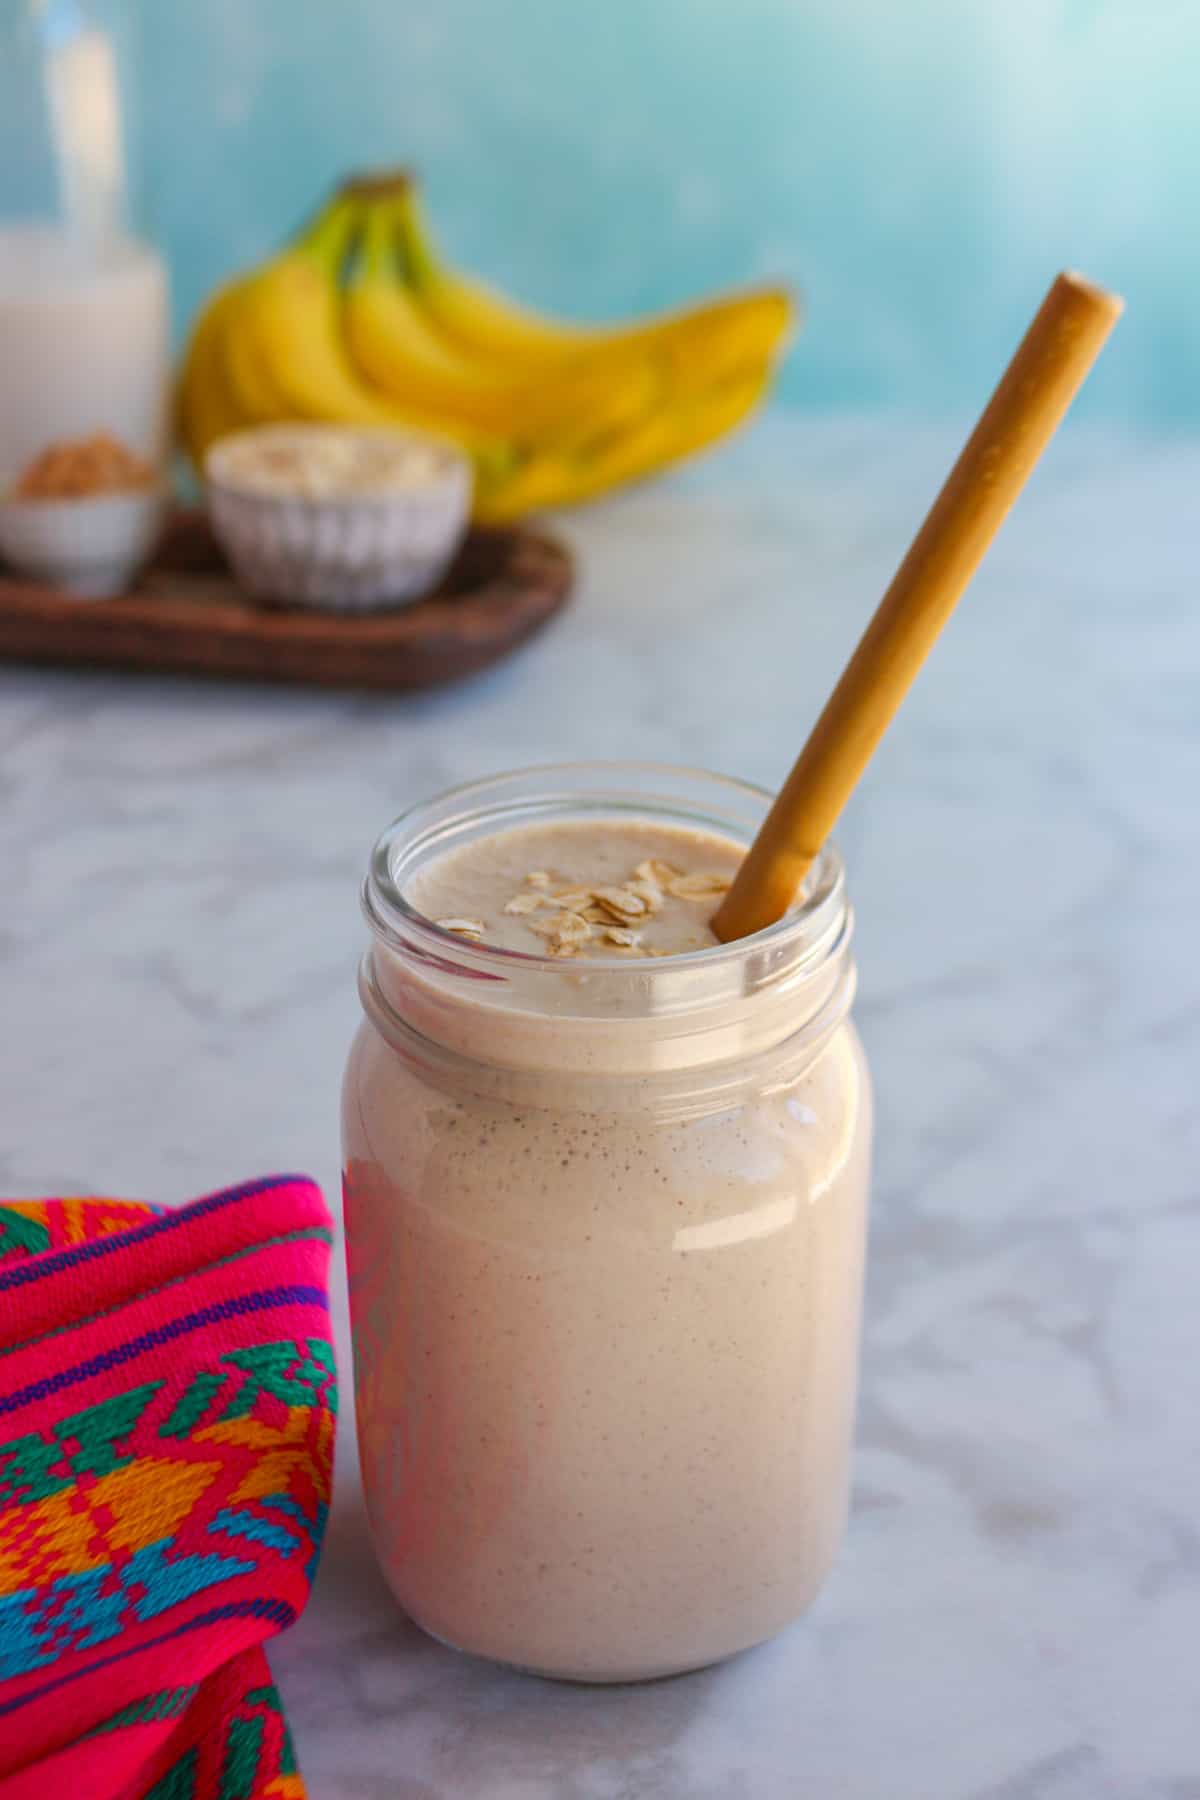 Glass filled with licuado de platano con avena (banana oatmeal smoothie) with a straw and the ingredients behind it